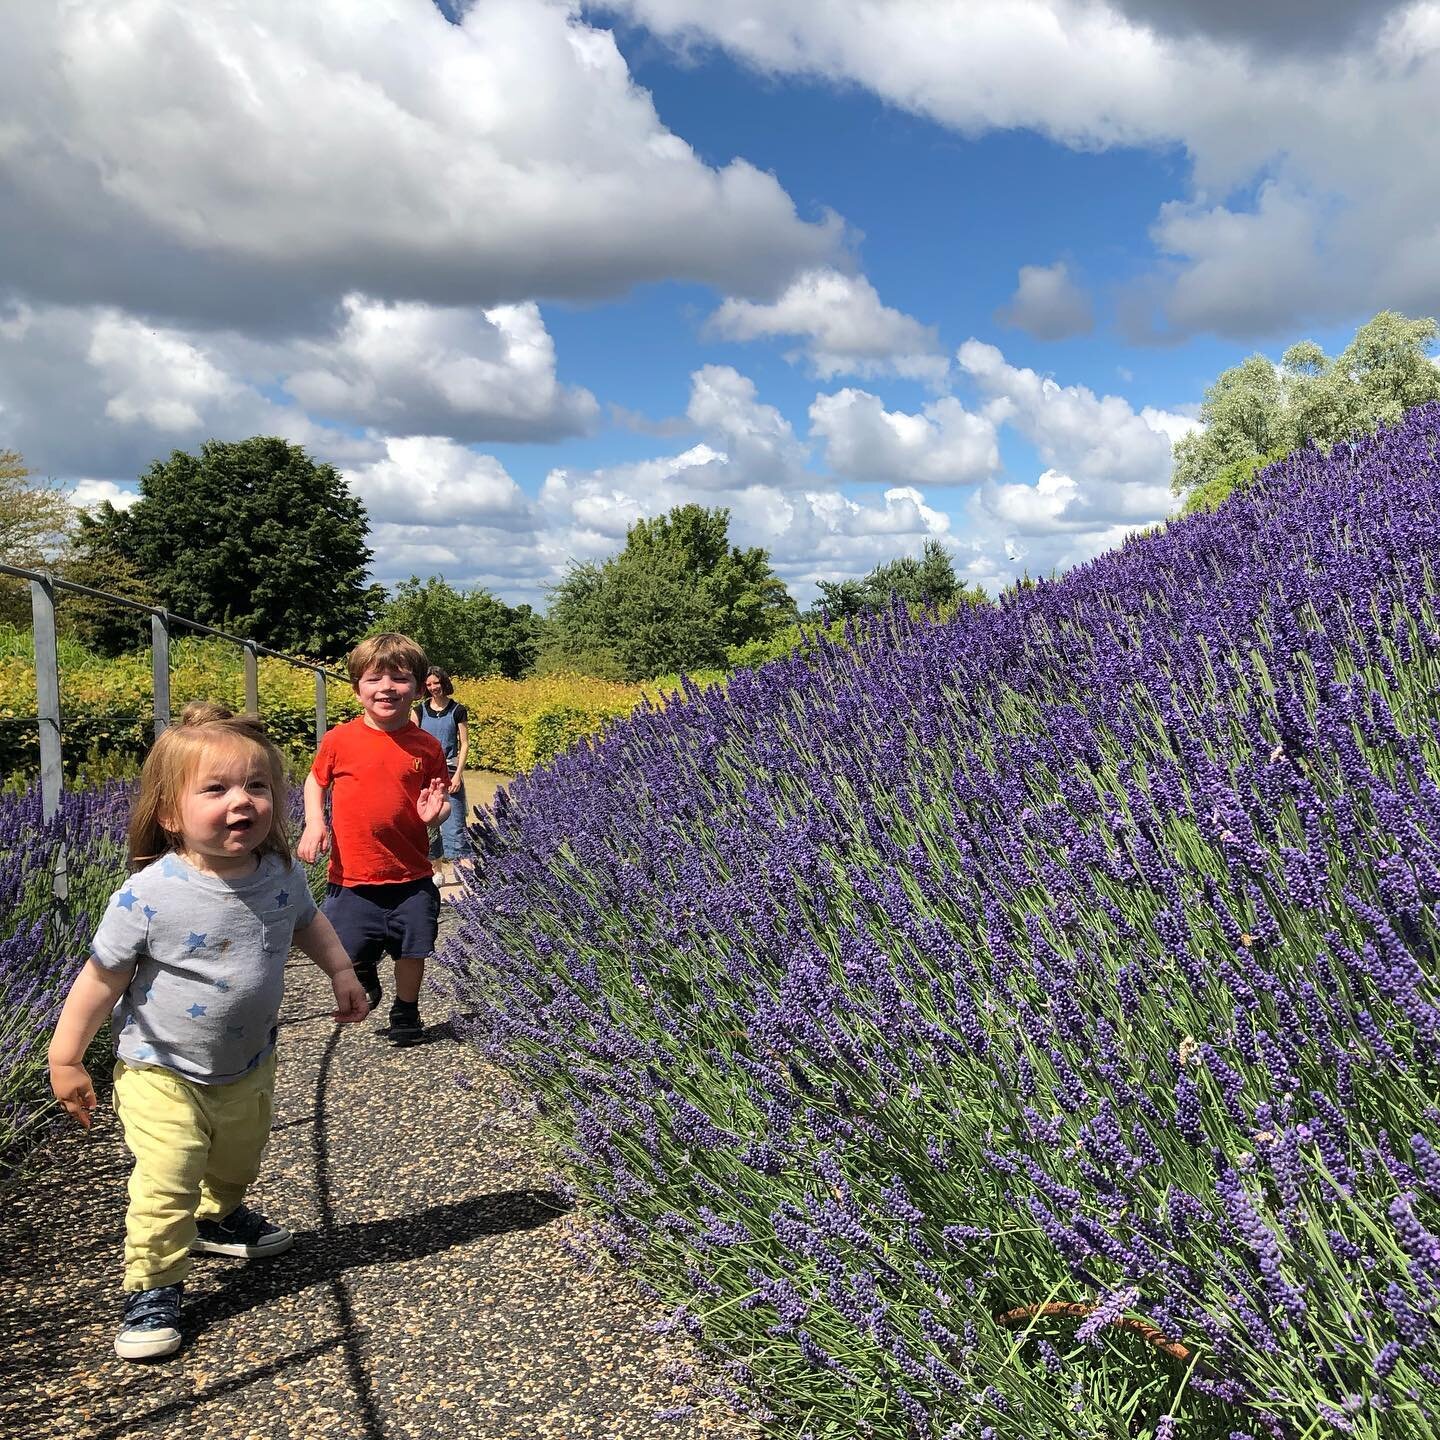 Enjoying the lavender hill at Wisley on Sunday